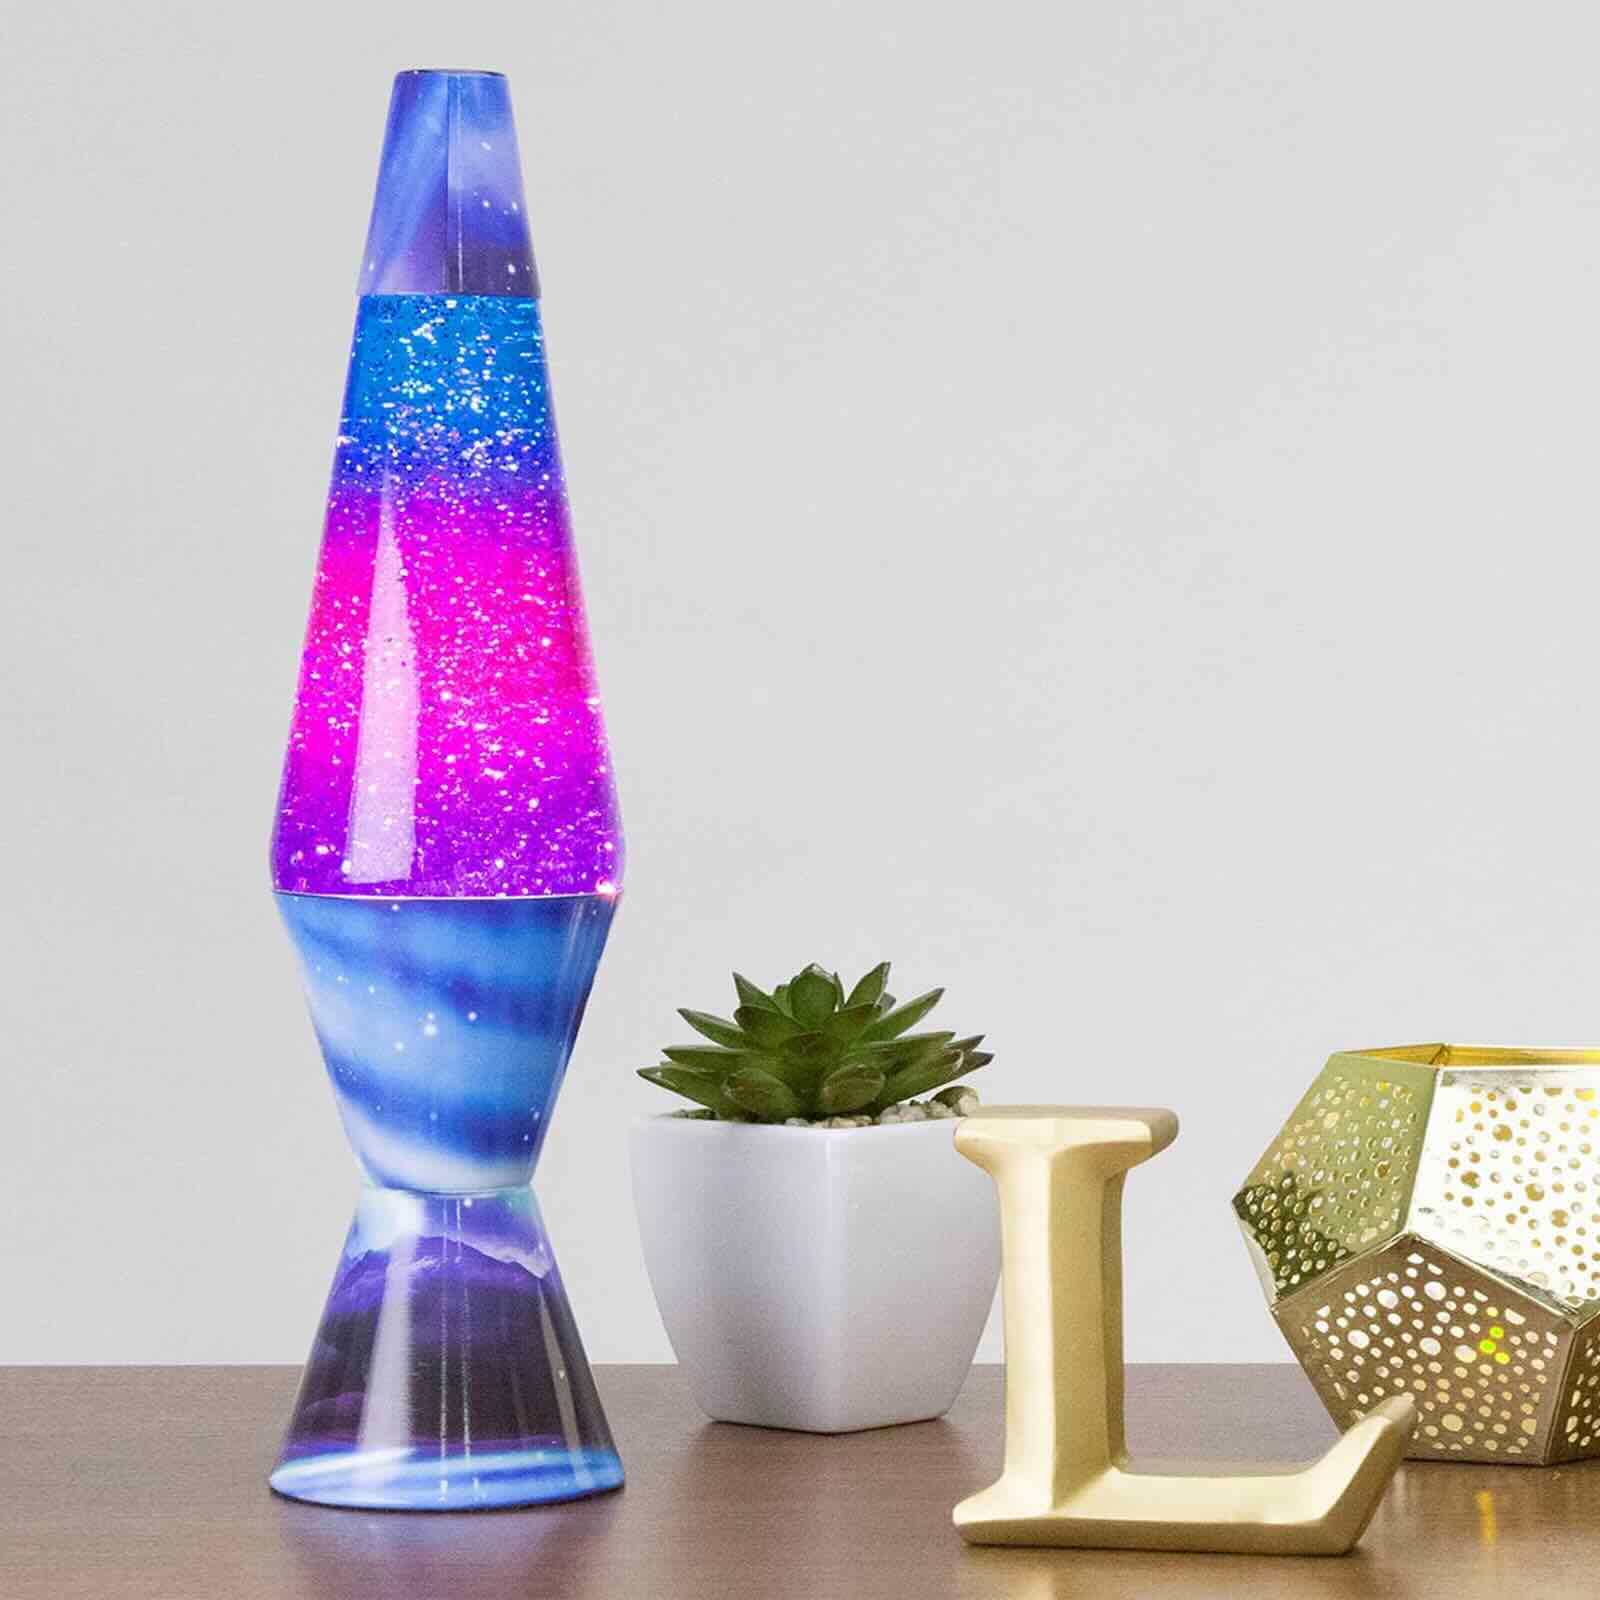 How Does A Lava Lamp Work?